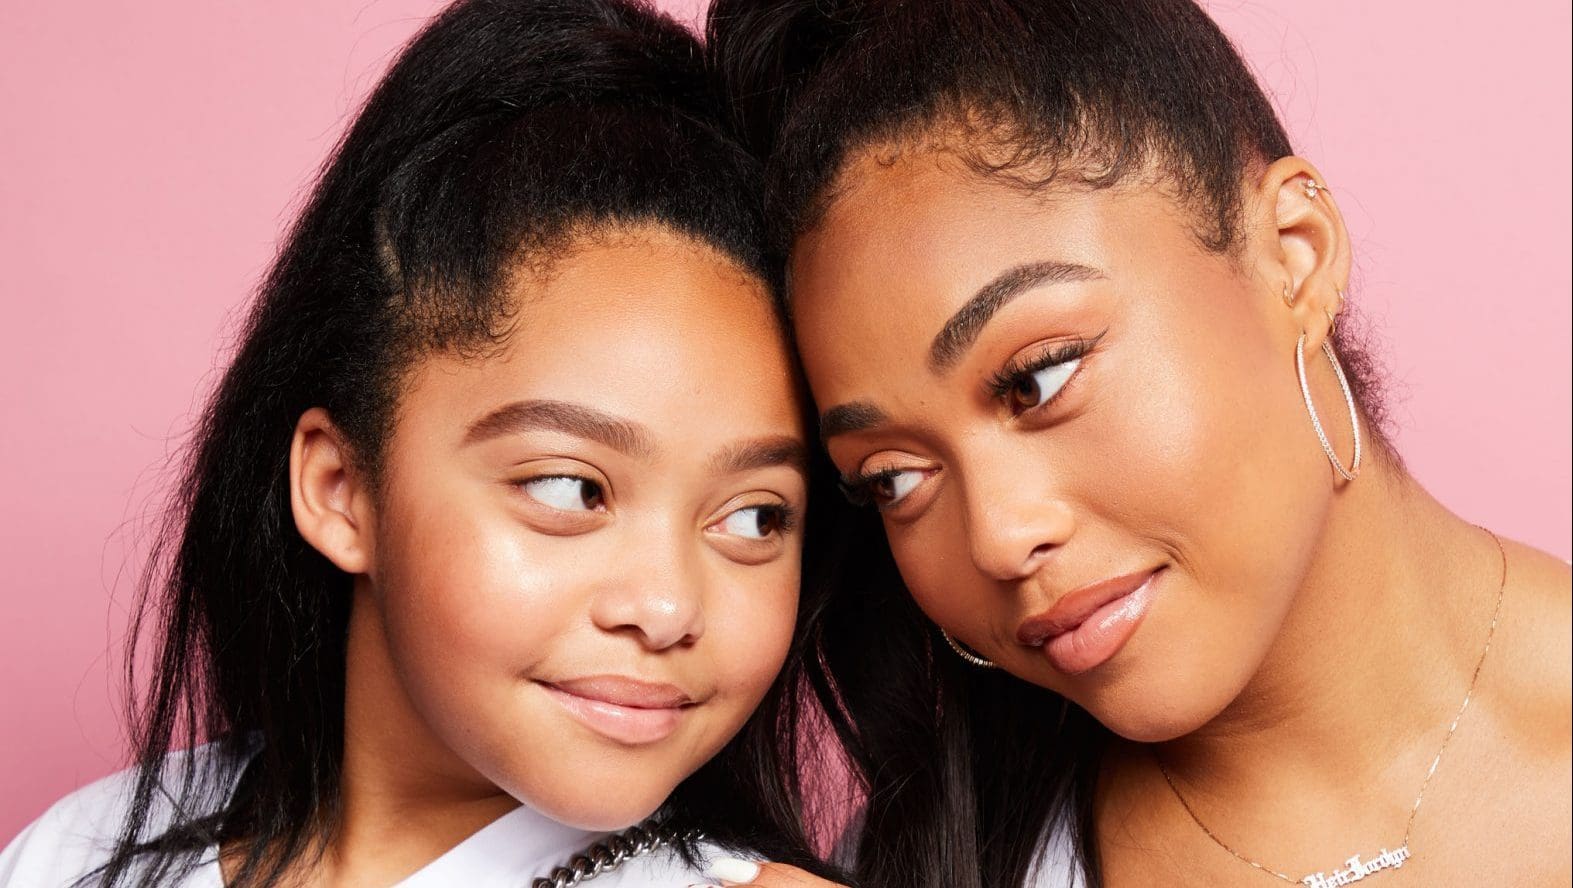 Jordyn Woods Couldn't Waste A Good Makeup Look And Filmed New Videos With her Sister, Jodie, Showing Their Dance Moves